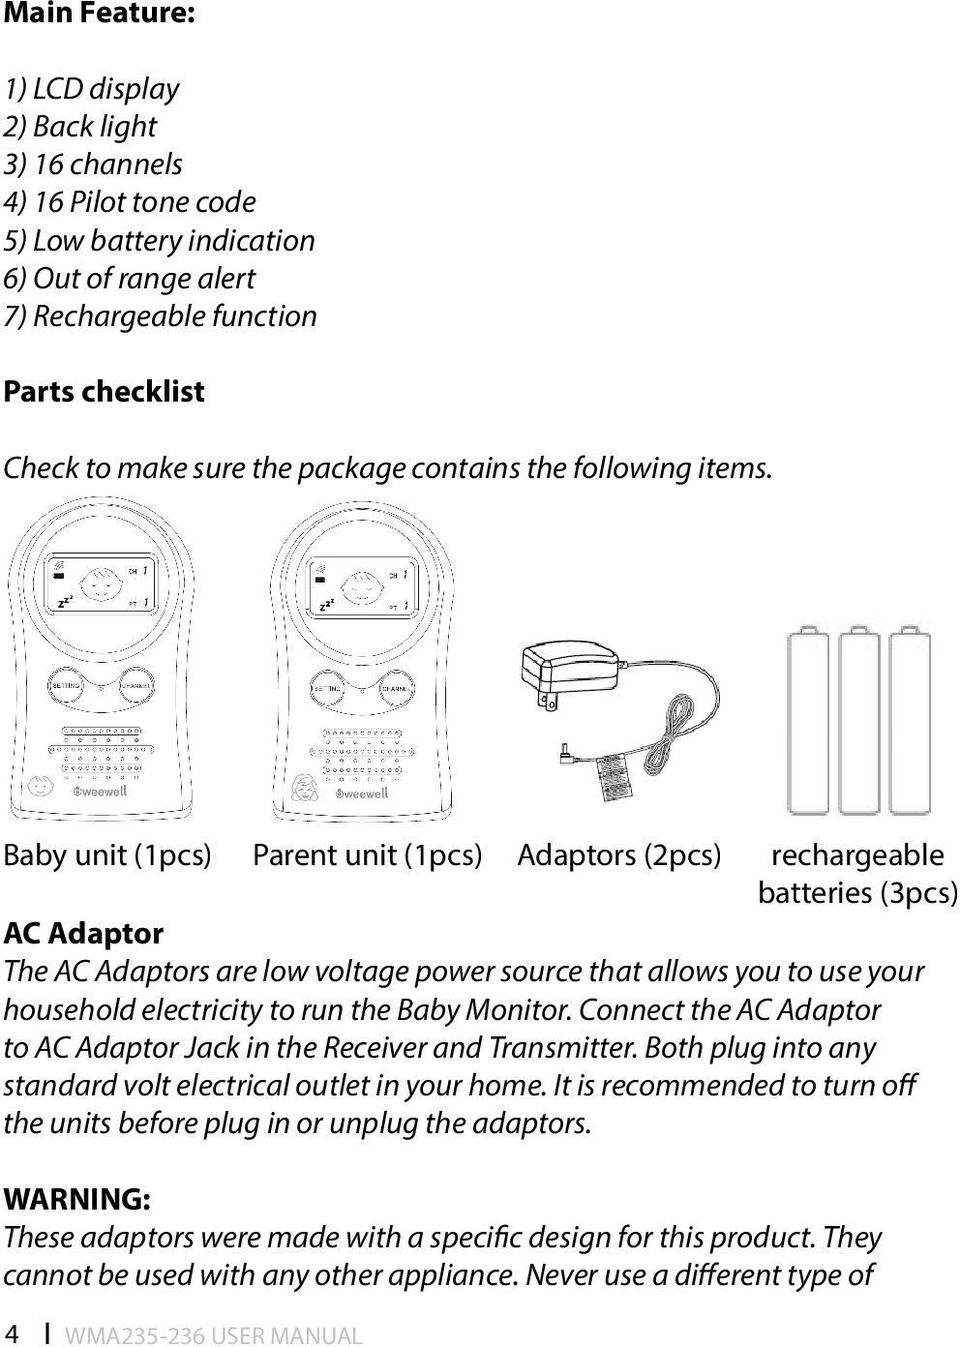 Baby unit (1pcs) Parent unit (1pcs) Adaptors (2pcs) rechargeable batteries (3pcs) AC Adaptor The AC Adaptors are low voltage power source that allows you to use your household electricity to run the